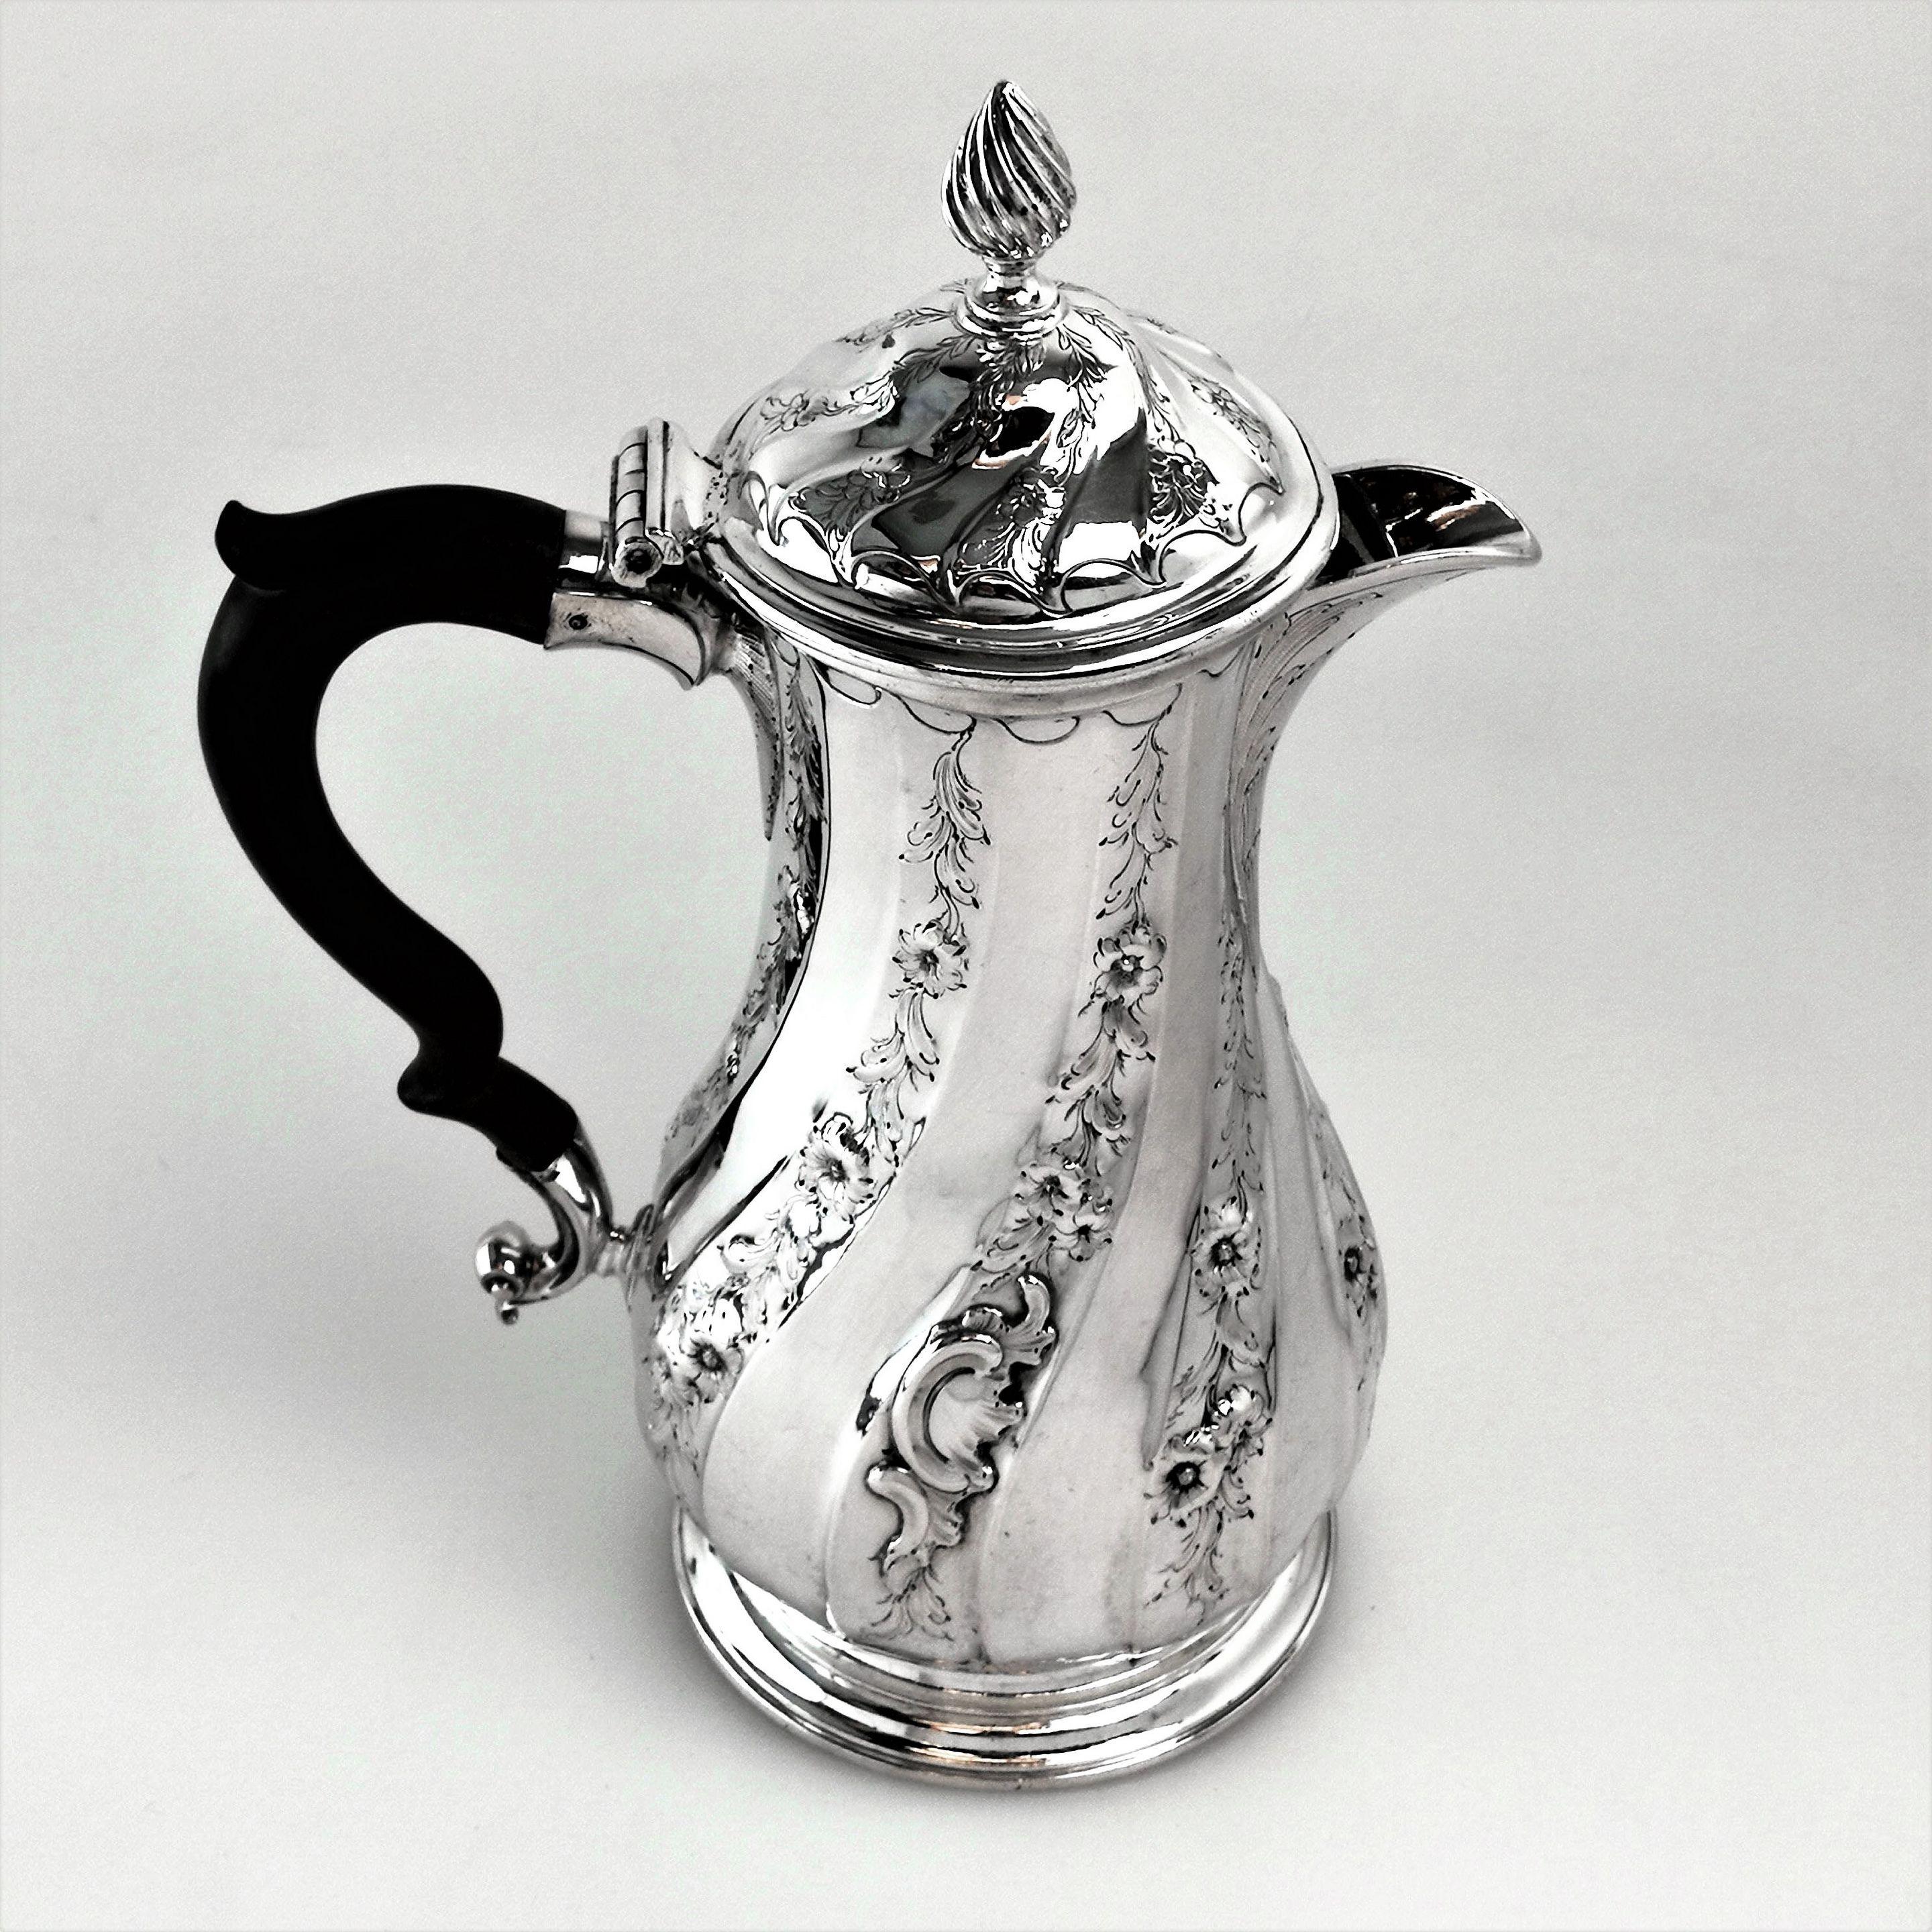 An excellent George II Georgian sterling Silver Coffee Pot / Hot Water Jug in a unusual Rococo design. This Coffee Pot boasts some wonderful design elements including an unusual asymmetrical spout and shaped rim to the Pot and fitted lid. The rhythm